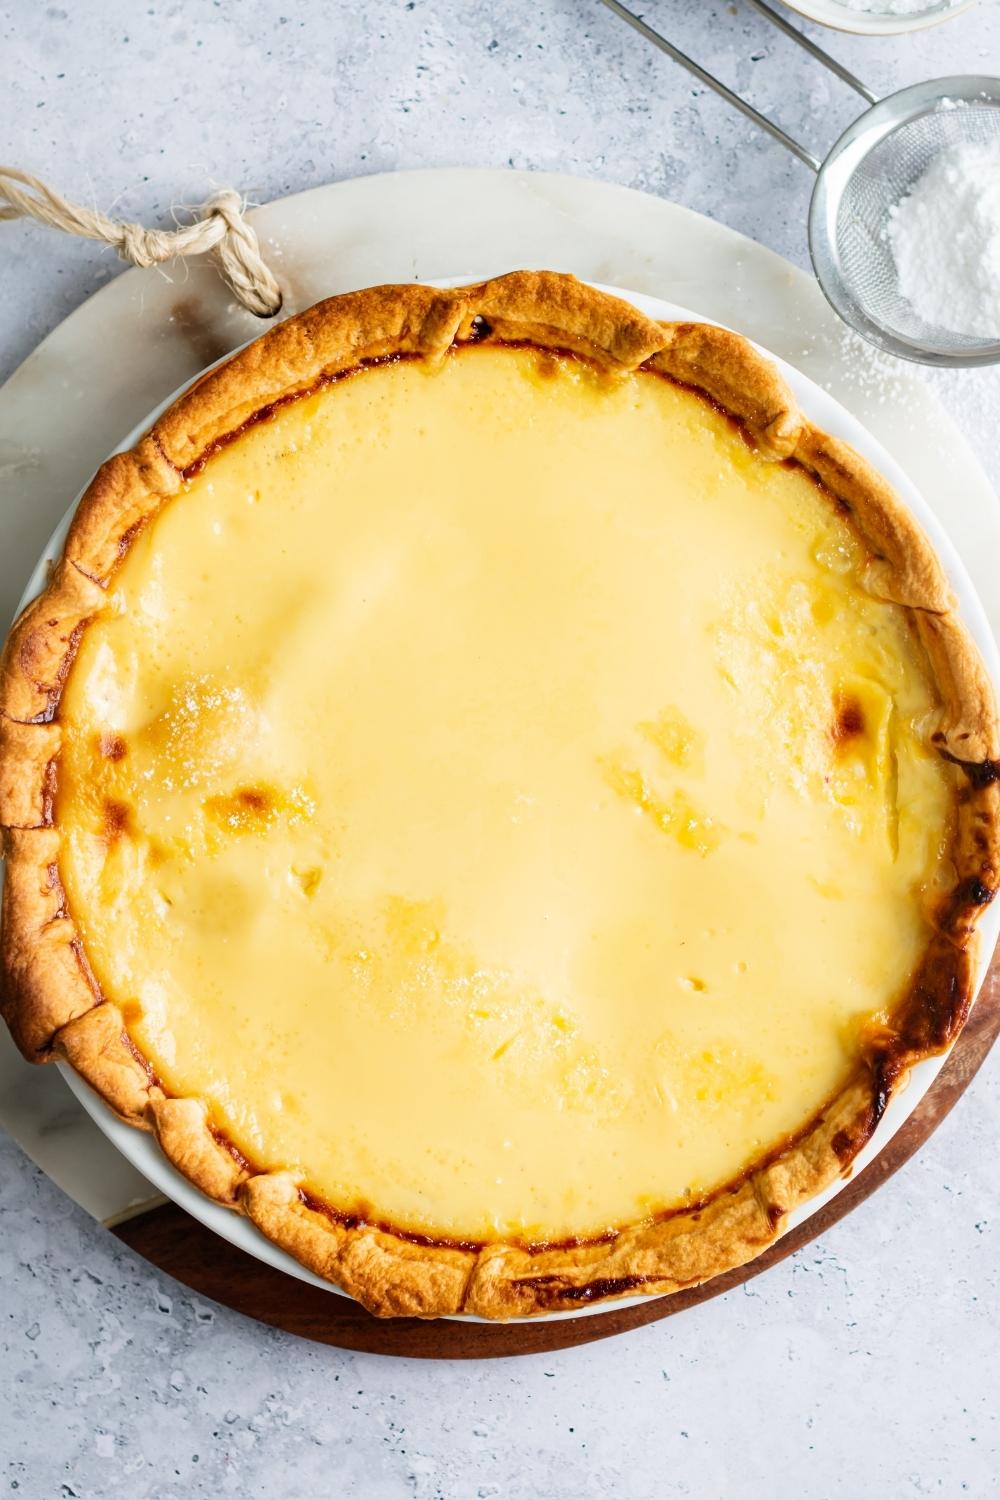 An overhead view of a custard pie fresh out of the oven with golden brown crust and cooked custard filling.